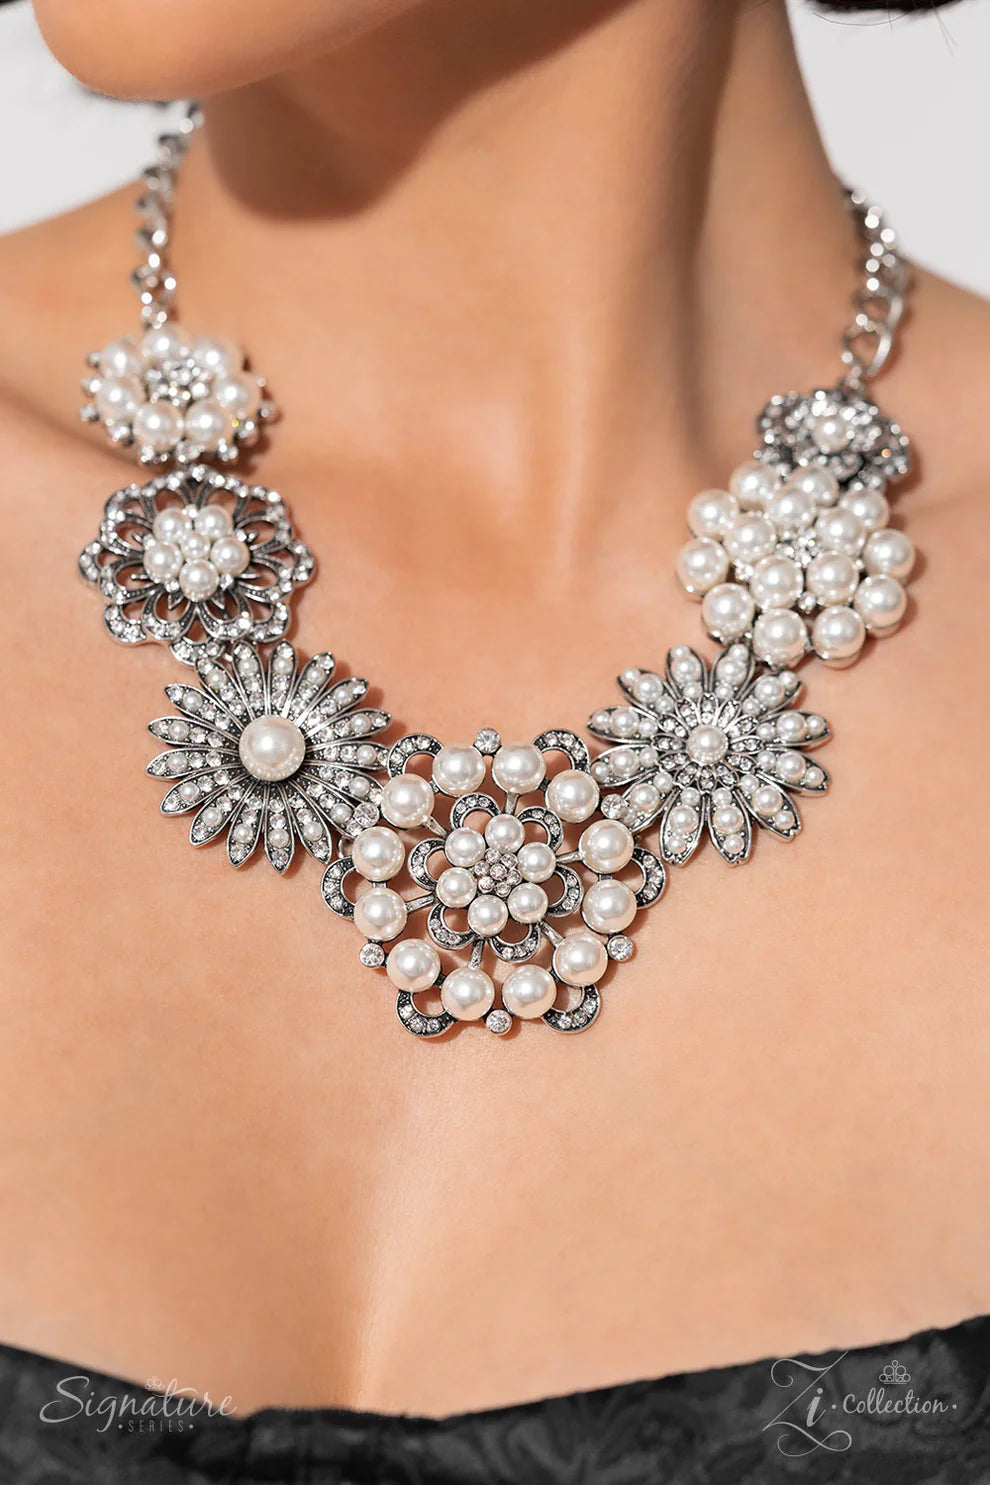 Paparazzi “The Raven” Zi Collection White Necklace Earring Set